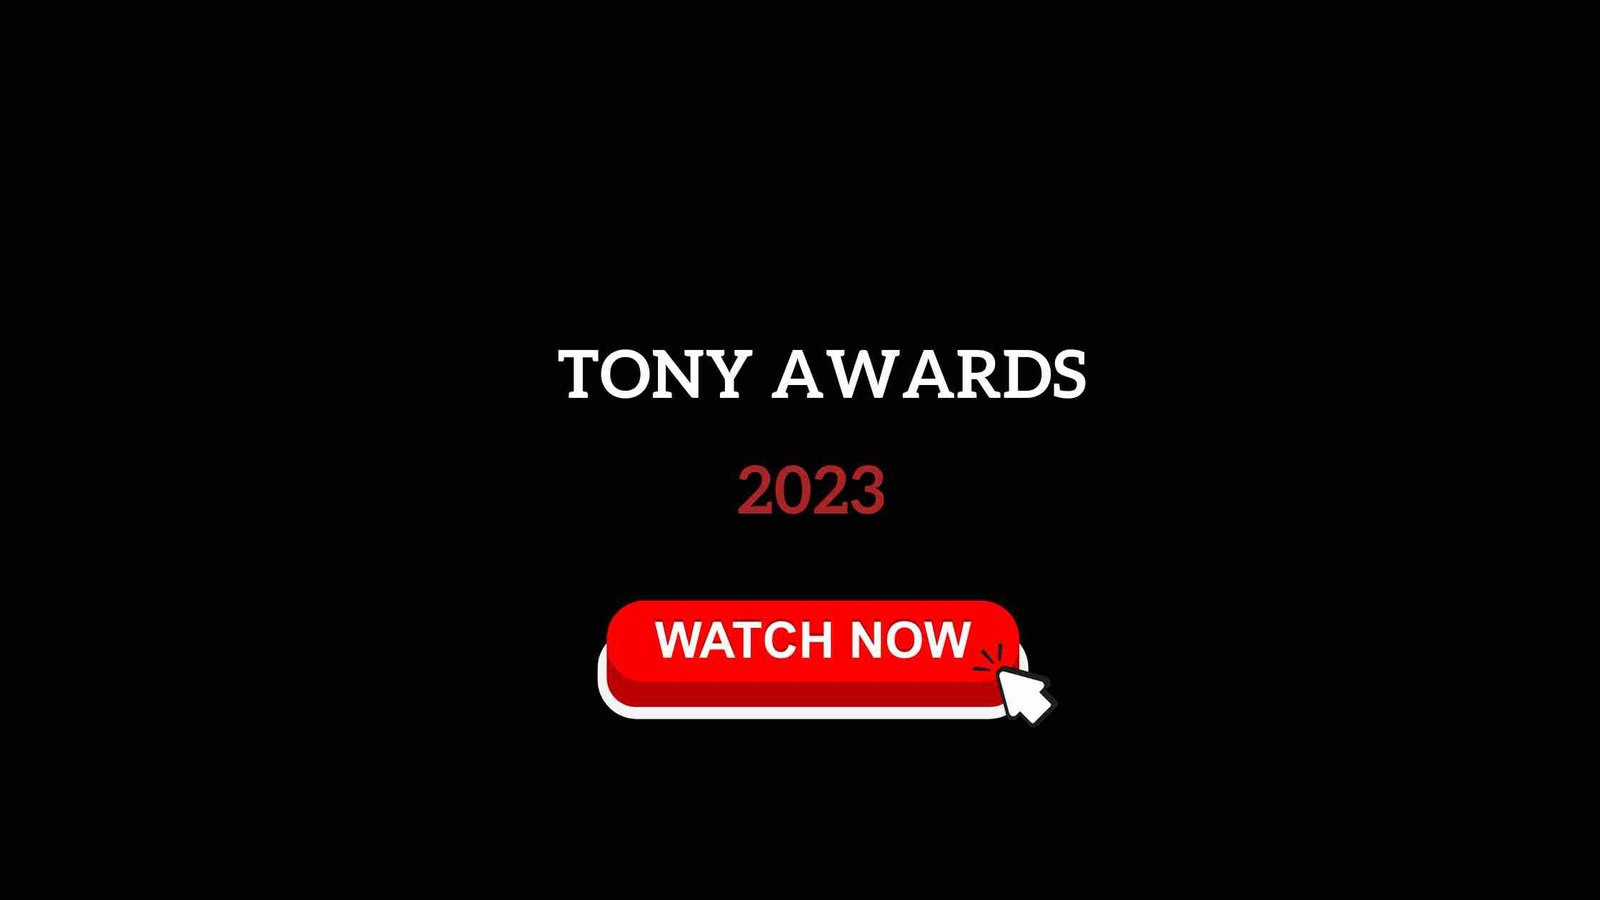 Here's How You Can Watch Tony Awards 2023 » GigaBunch